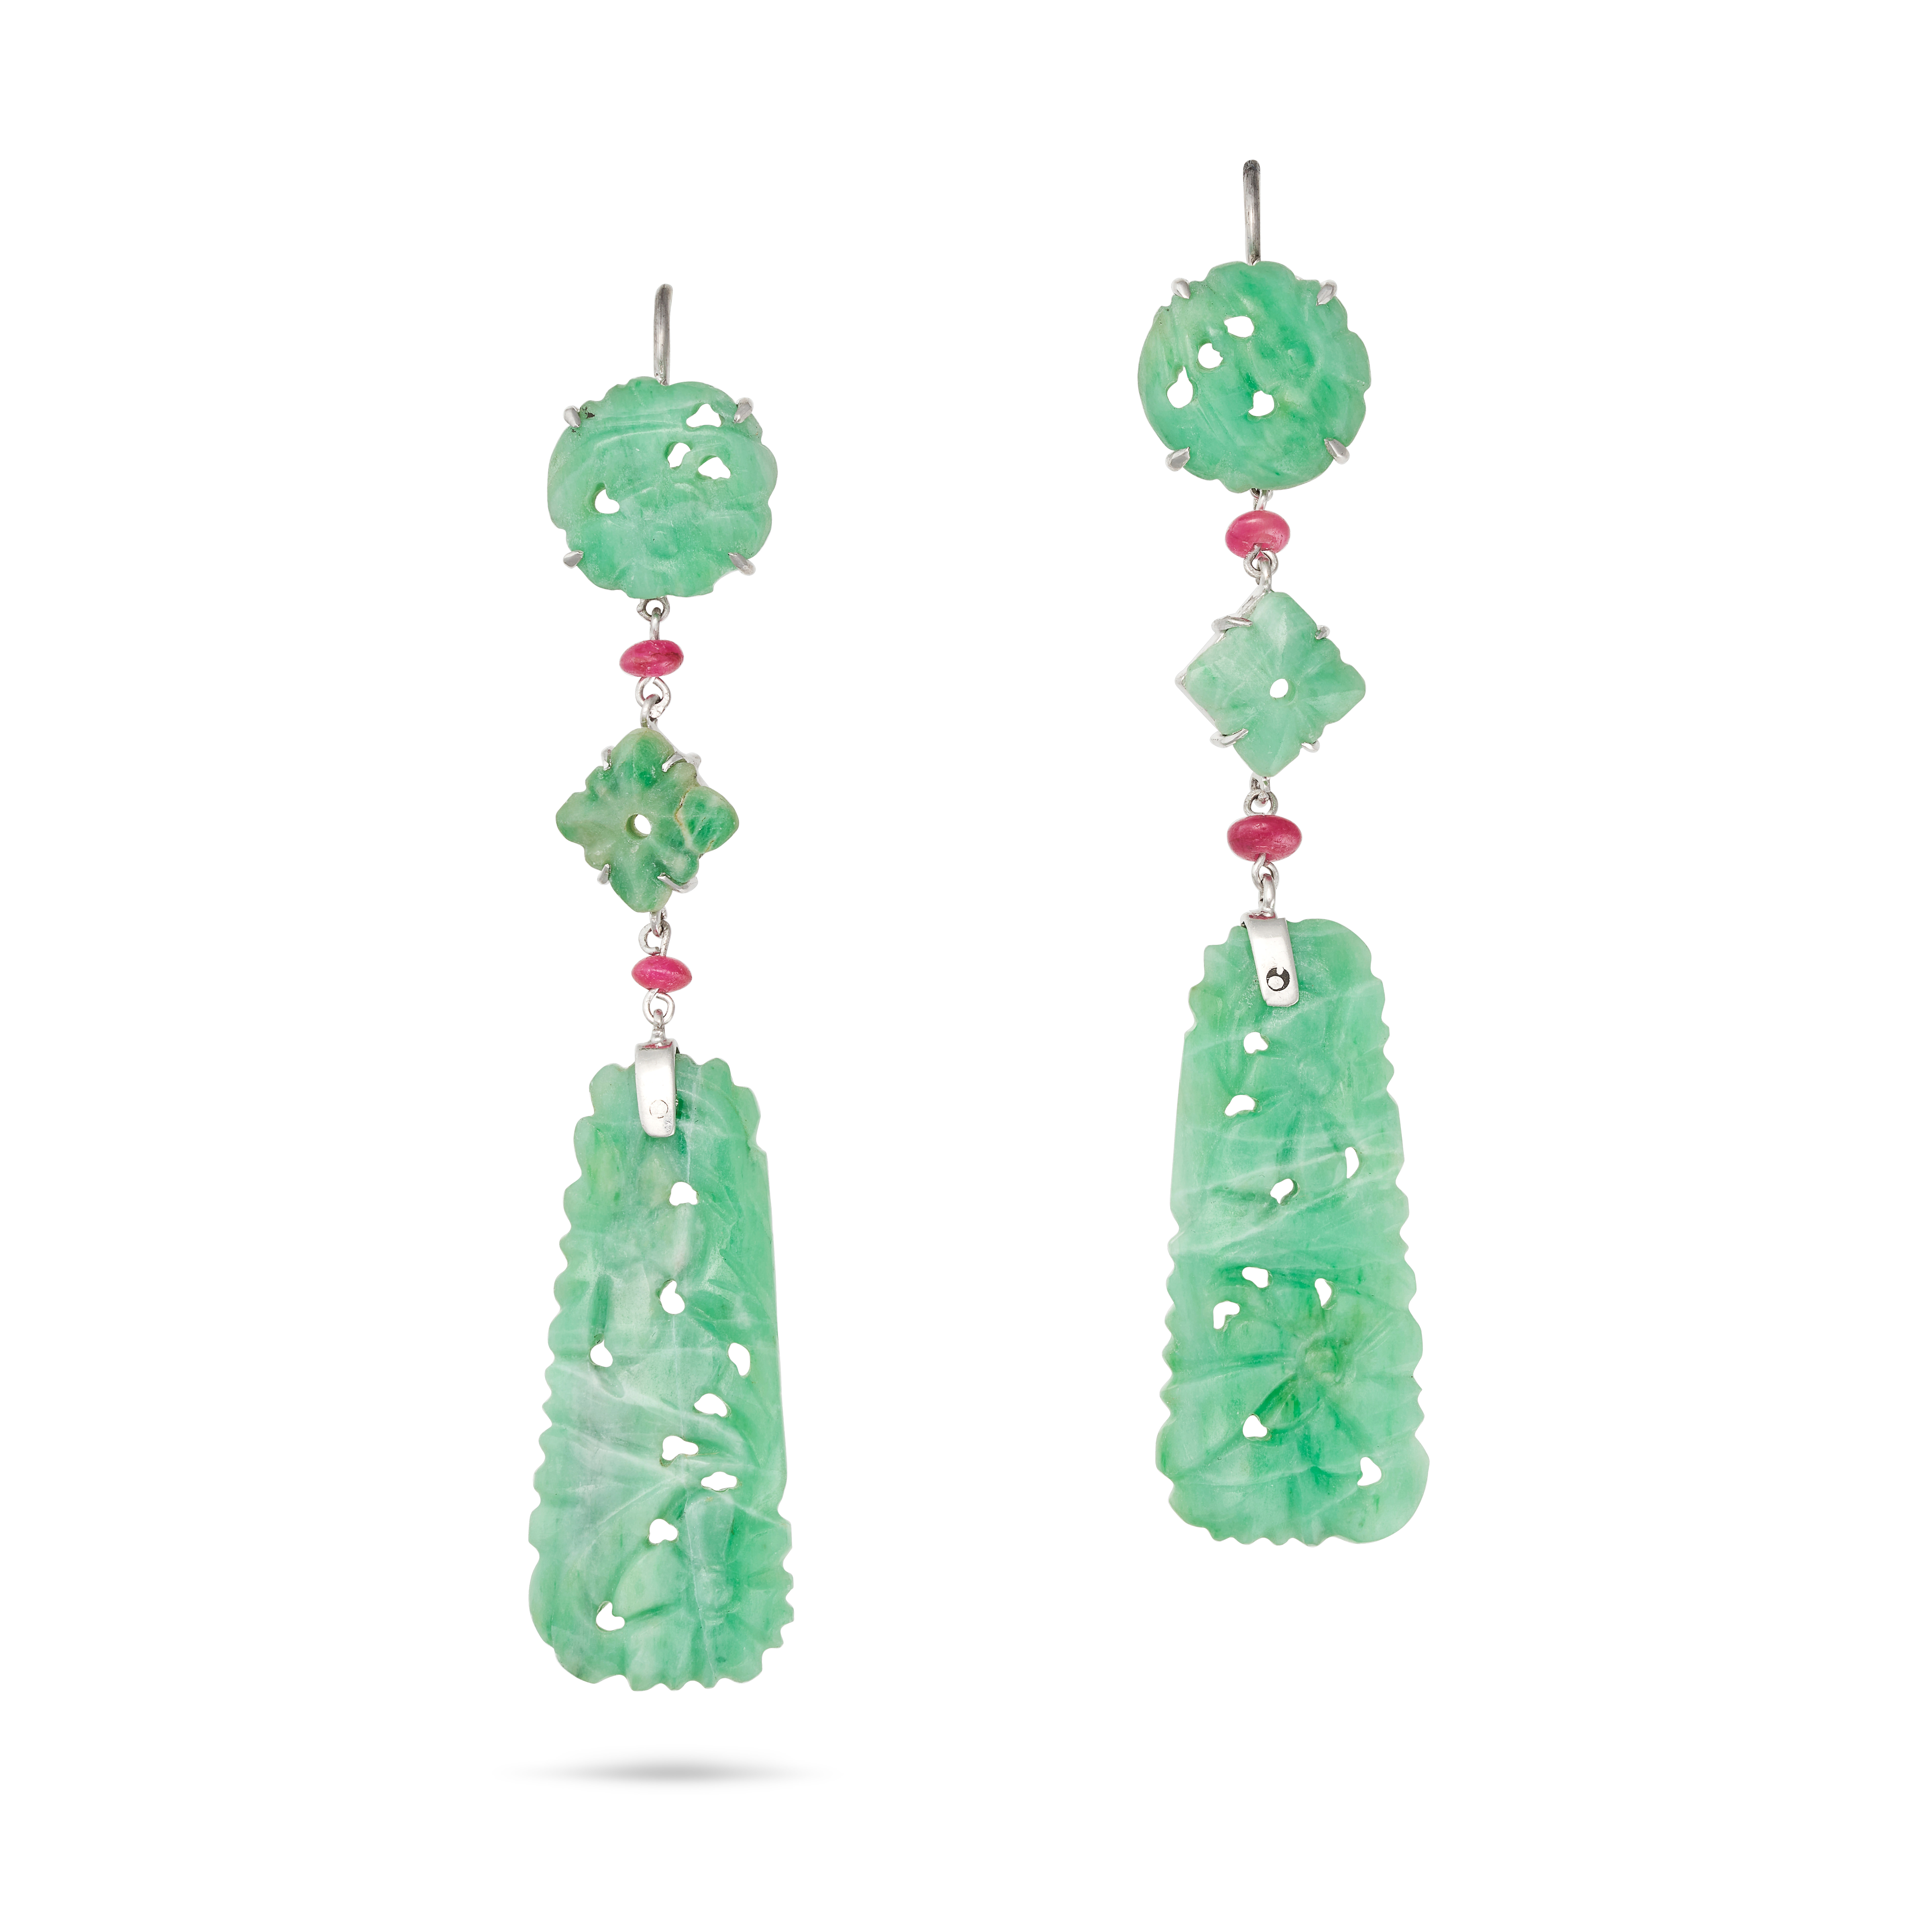 A PAIR OF JADEITE JADE AND RUBY DROP EARRINGS in white gold, each comprising two carved jadeite j...